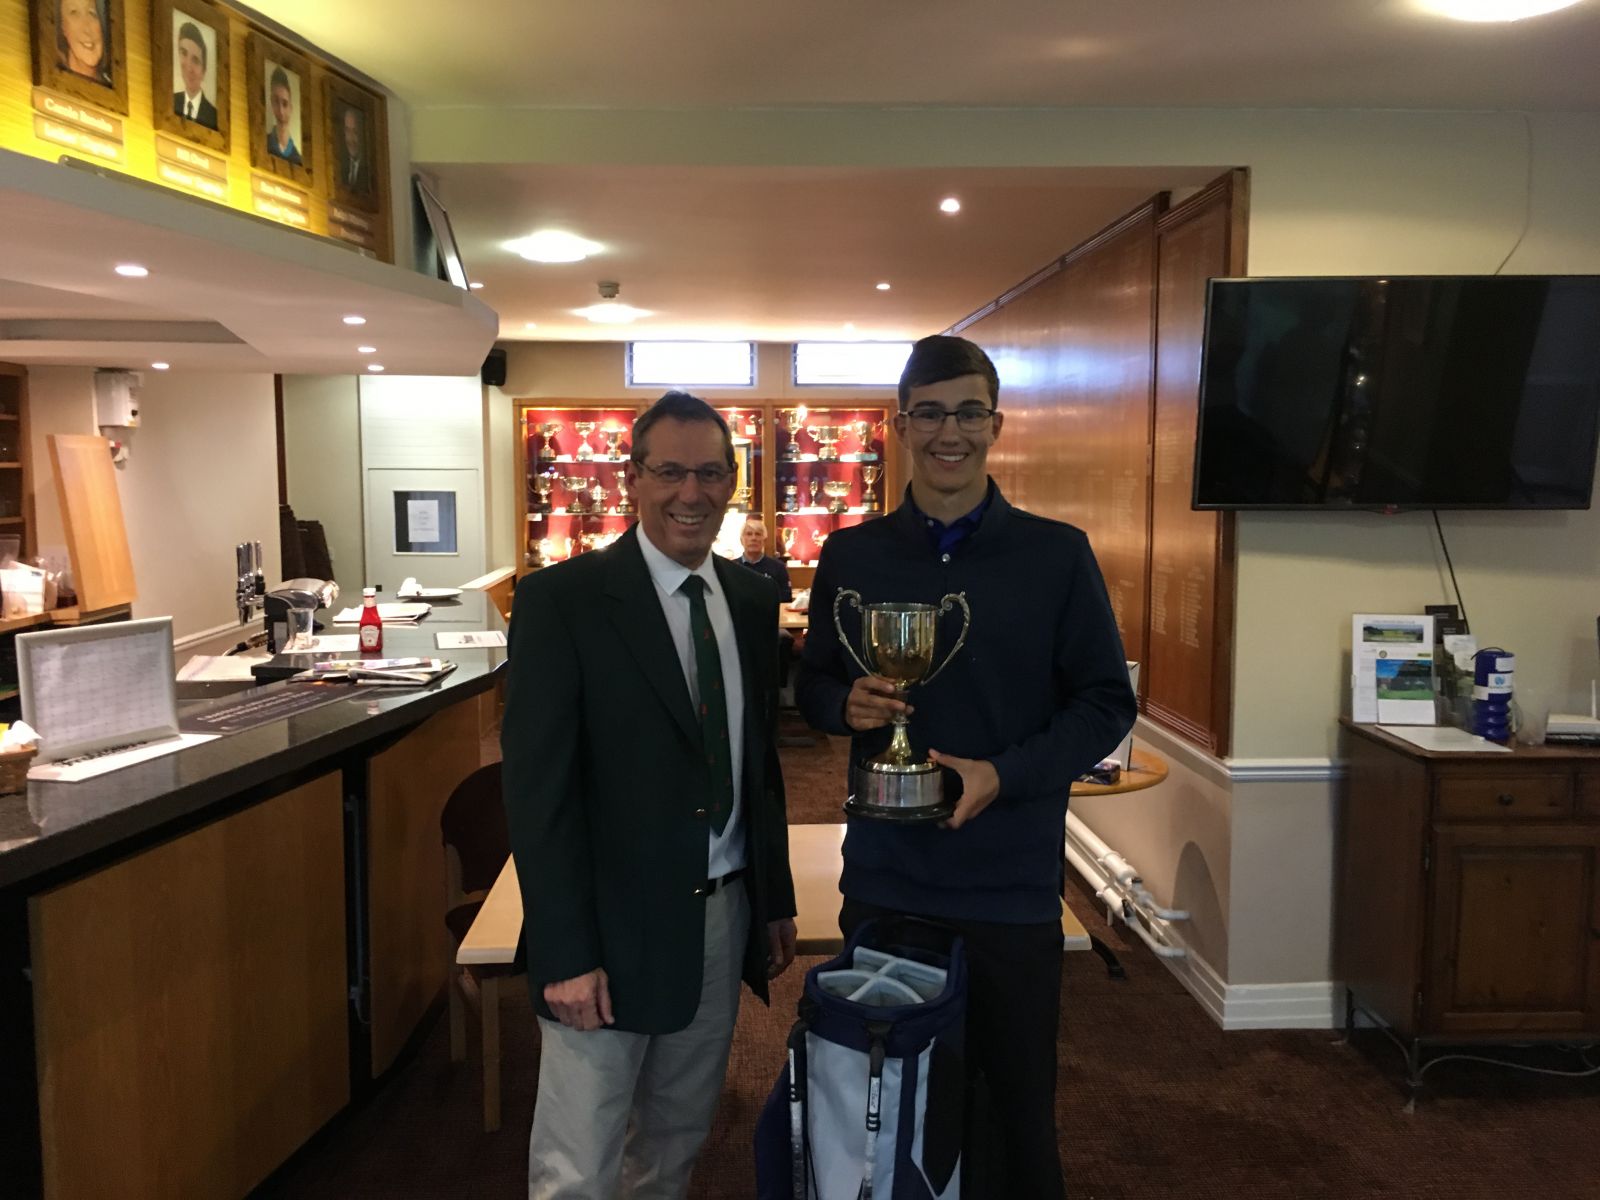 One of the lucky Junior Open winners Nathan